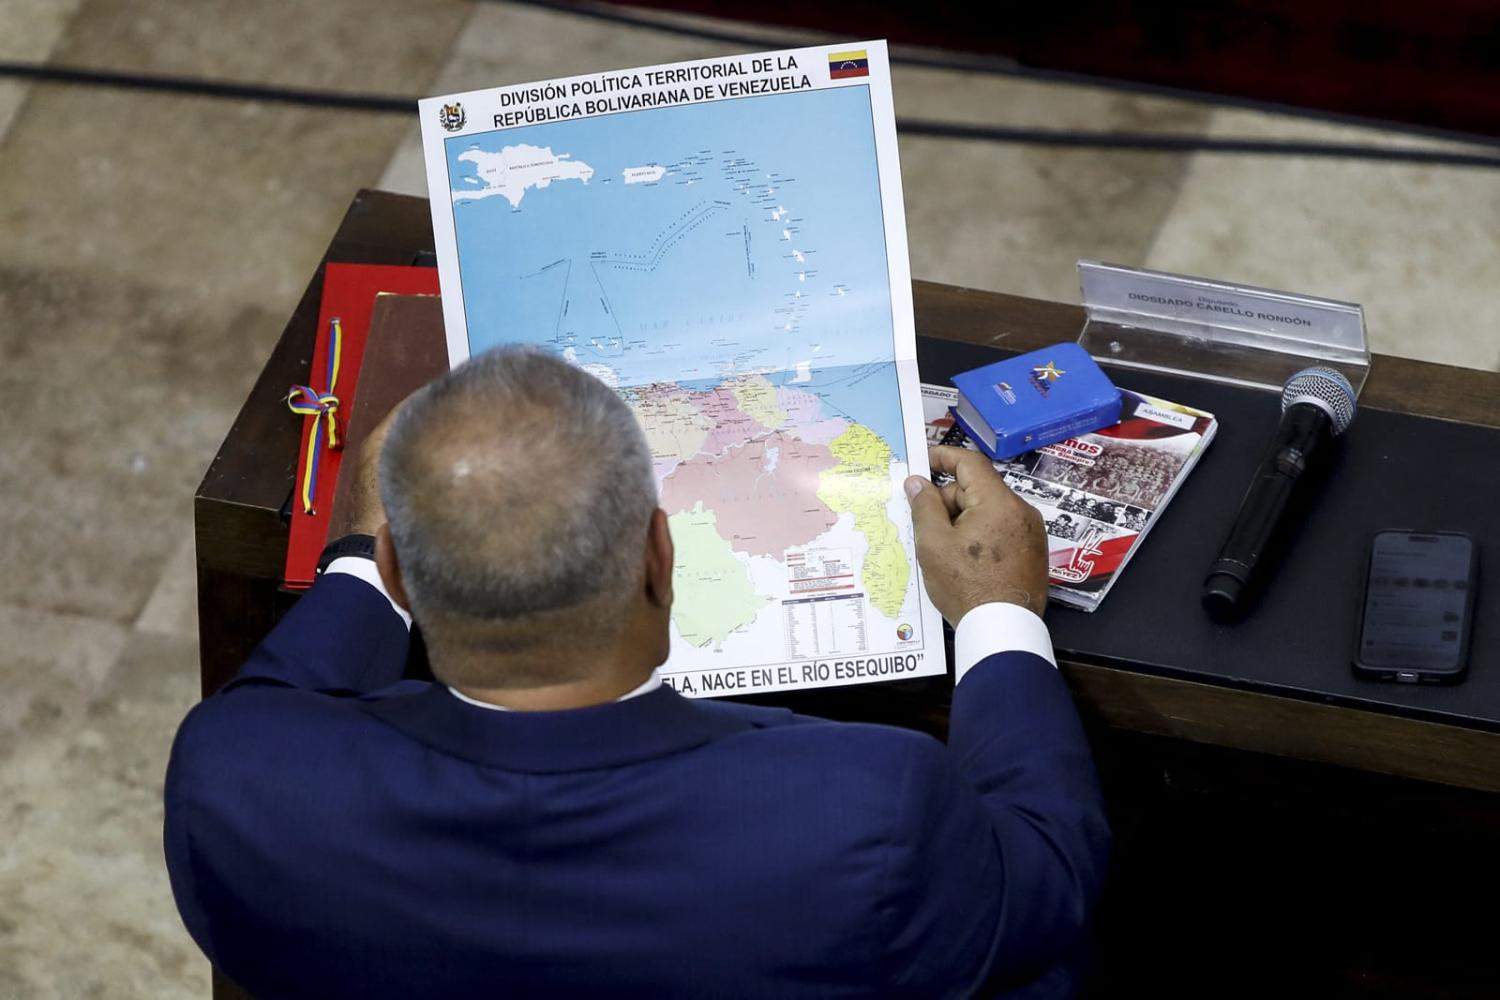 Debate in Venezuela's National Assembly on Wednesday featuring new map showing the accession of Guyana Essequiba (Pedro Rances Mattey/AFP via Getty Images)